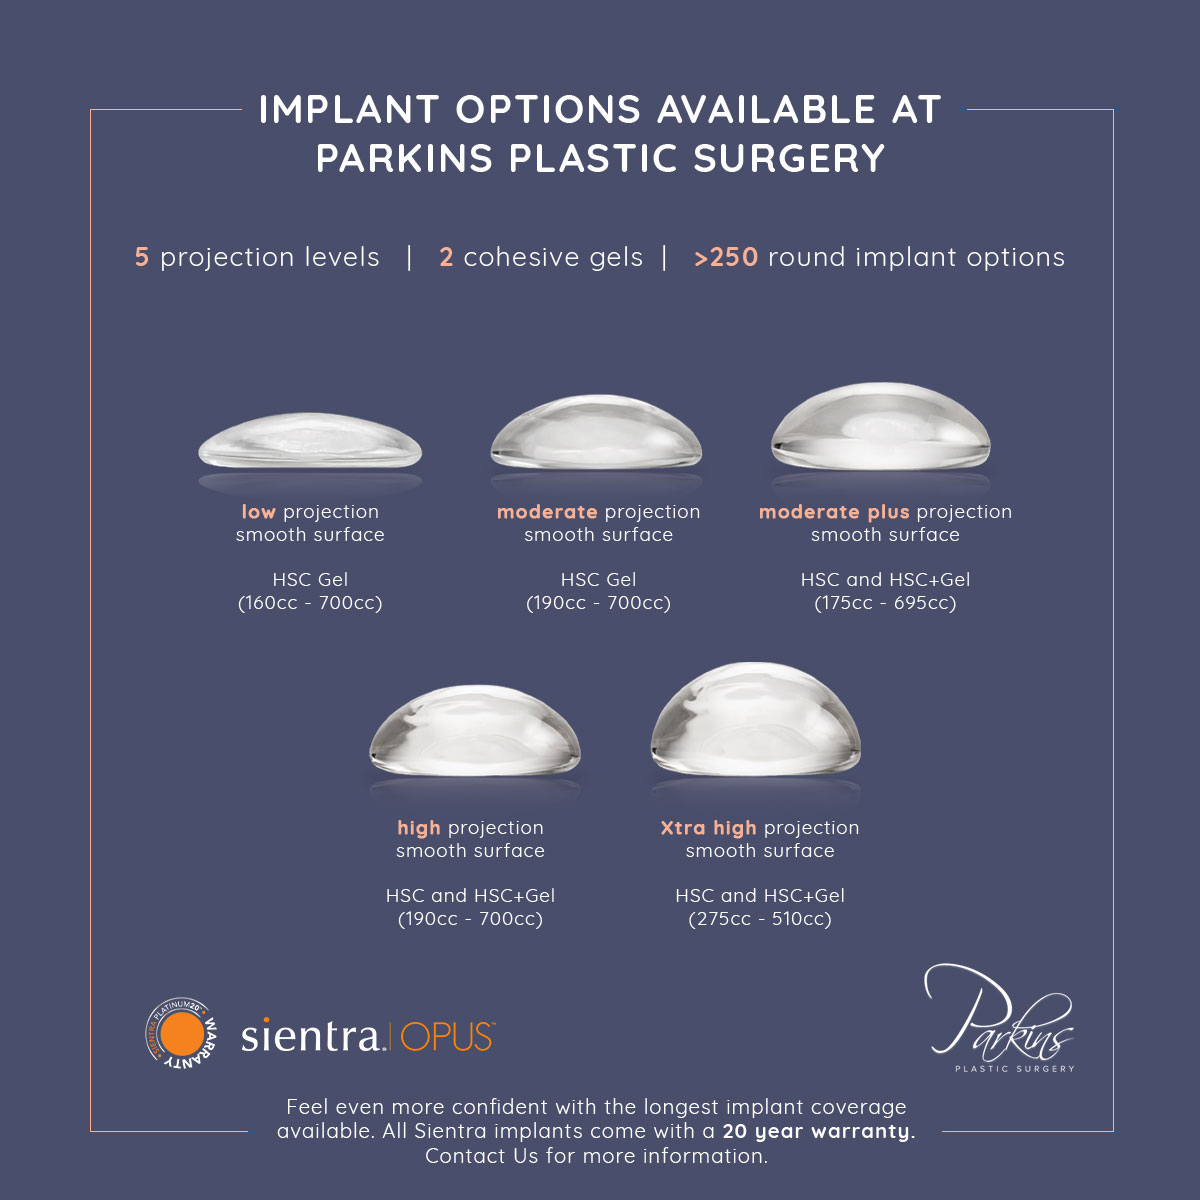 Choose from more than 250 round implant options at Parkins Plastic Surgery in the Milwaukee area.